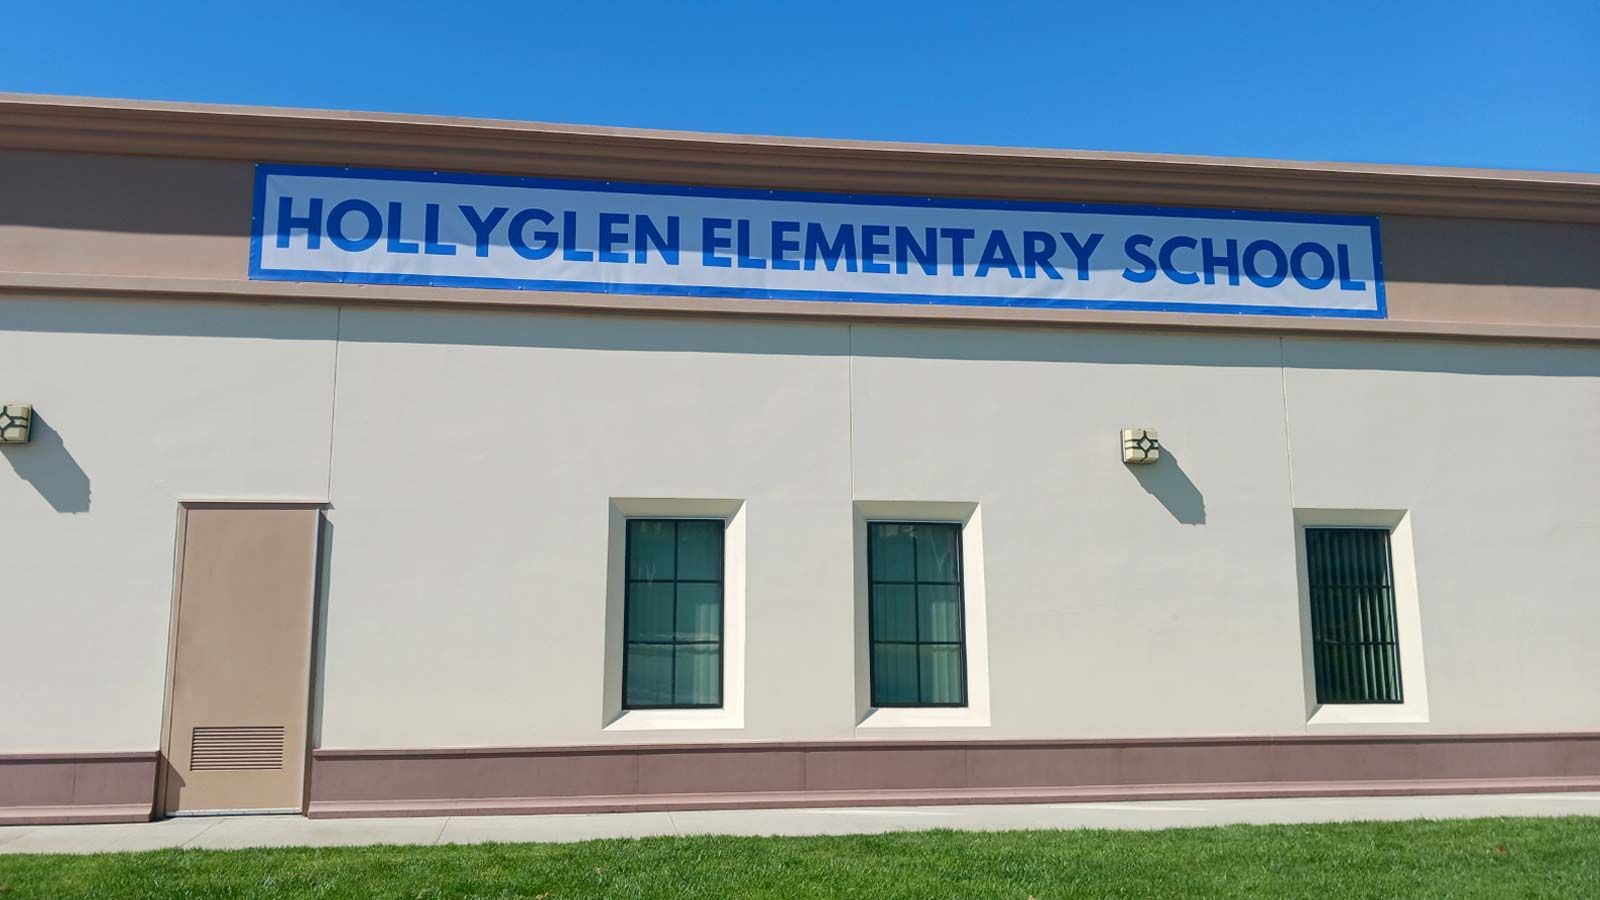 Hollyglen Elementary School college sign on a building